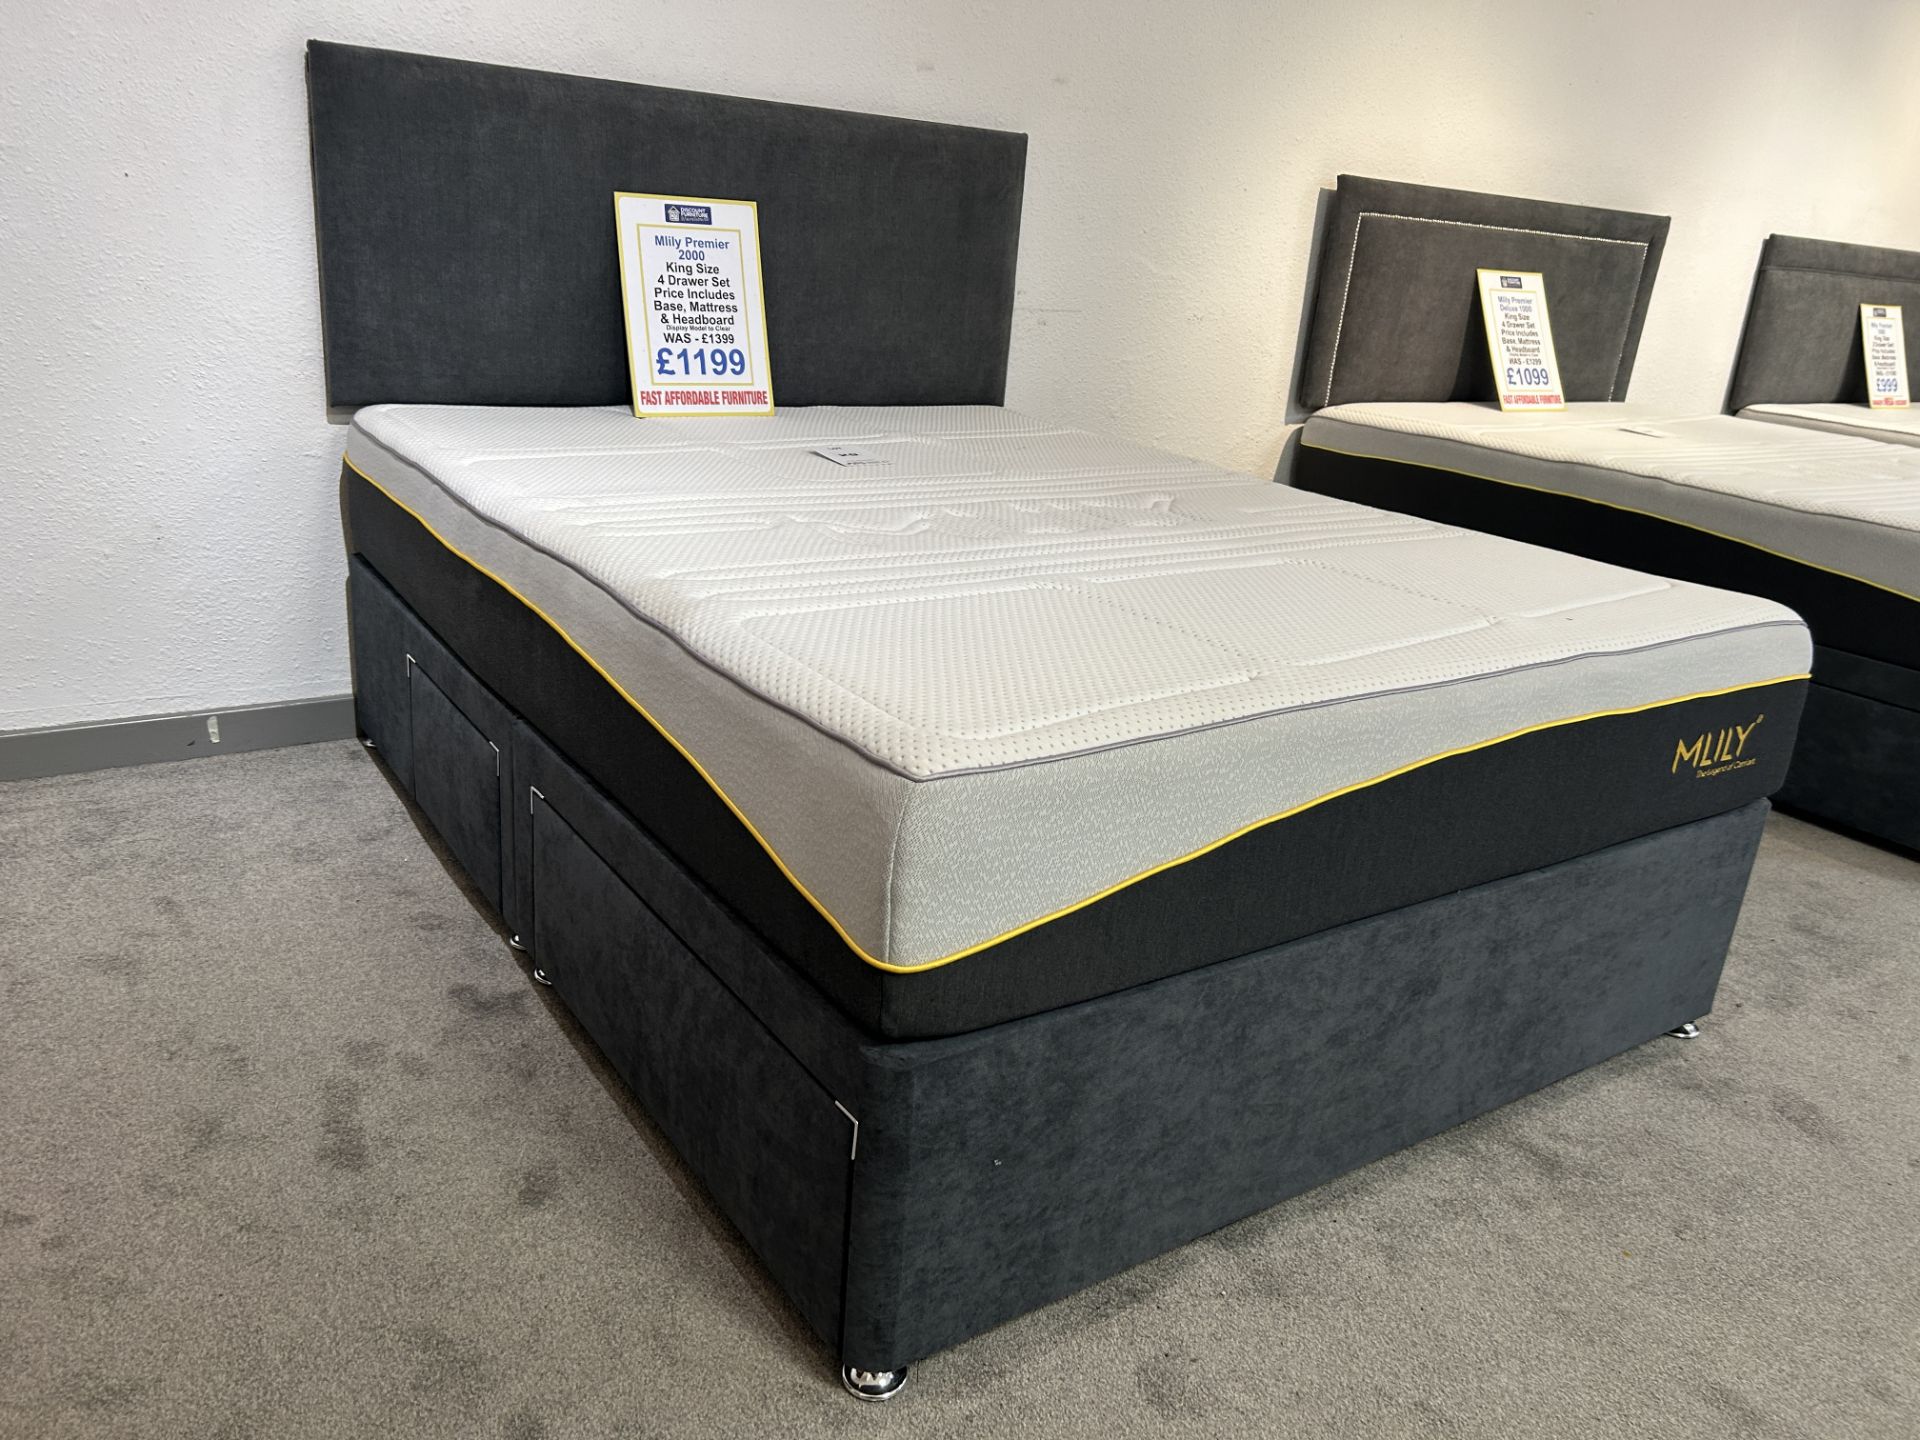 Ex-Display King Size 2 Drawer Bed Set incl: MLily Premier 2000 Mattress, Base & Headboard | RRP £1,3 - Image 3 of 4